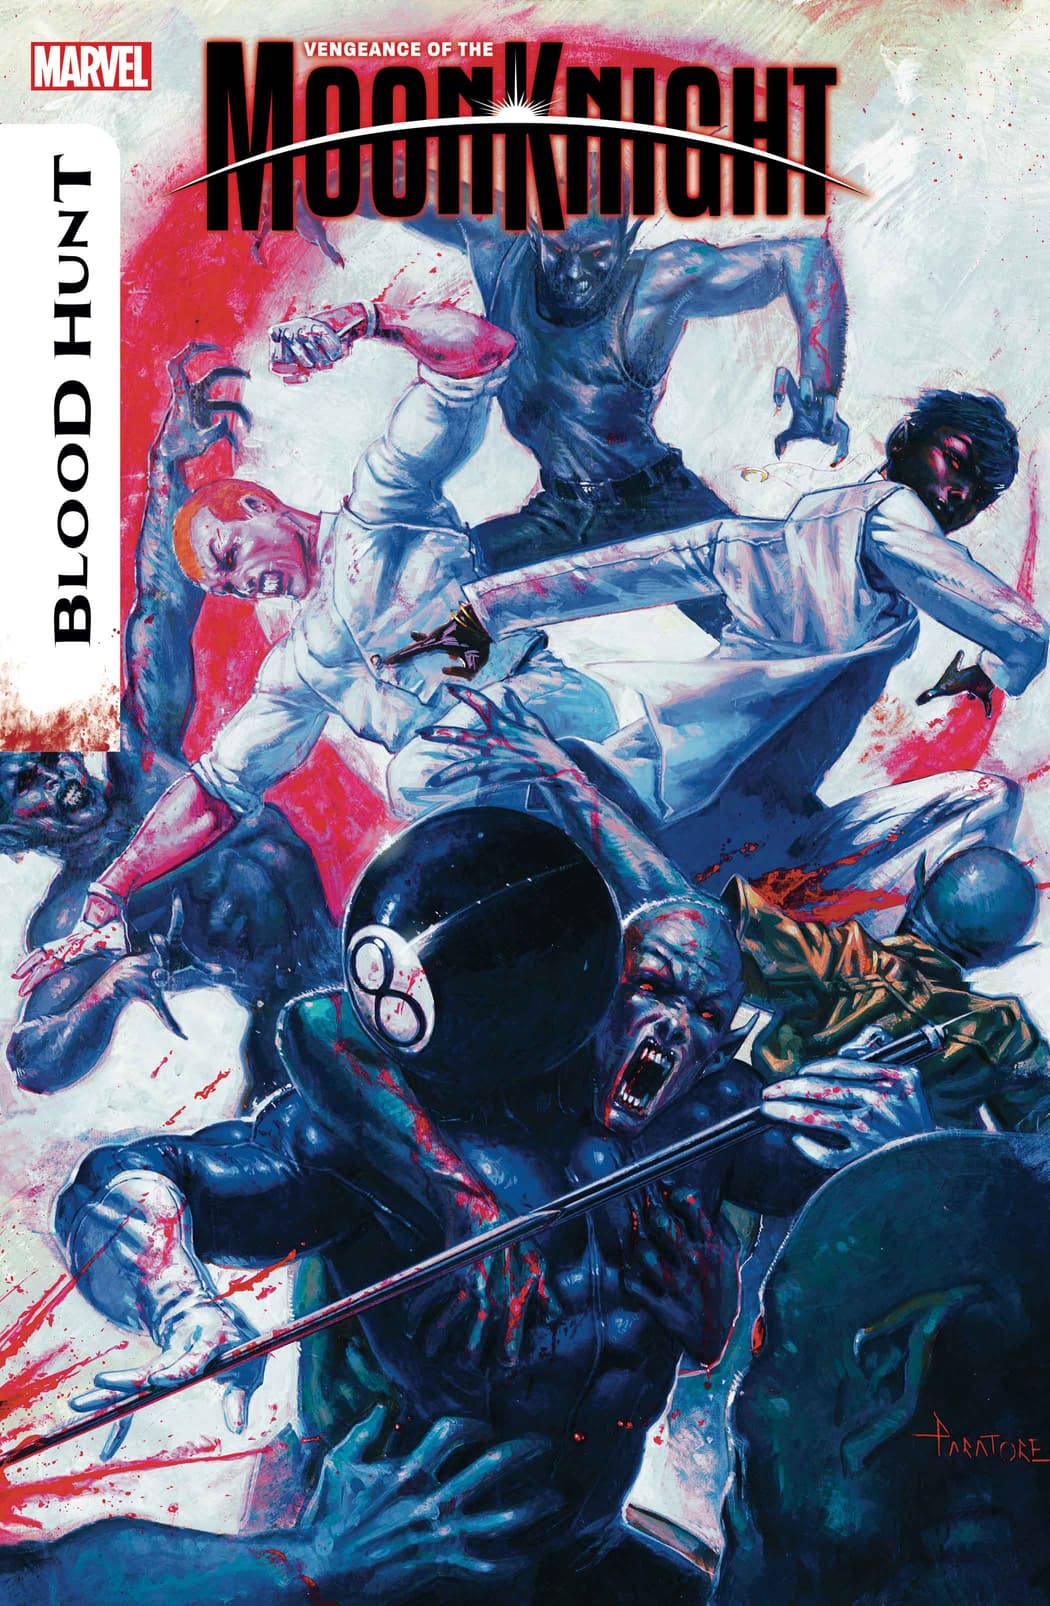 Venegeance of the Moon Knight #6 cover art